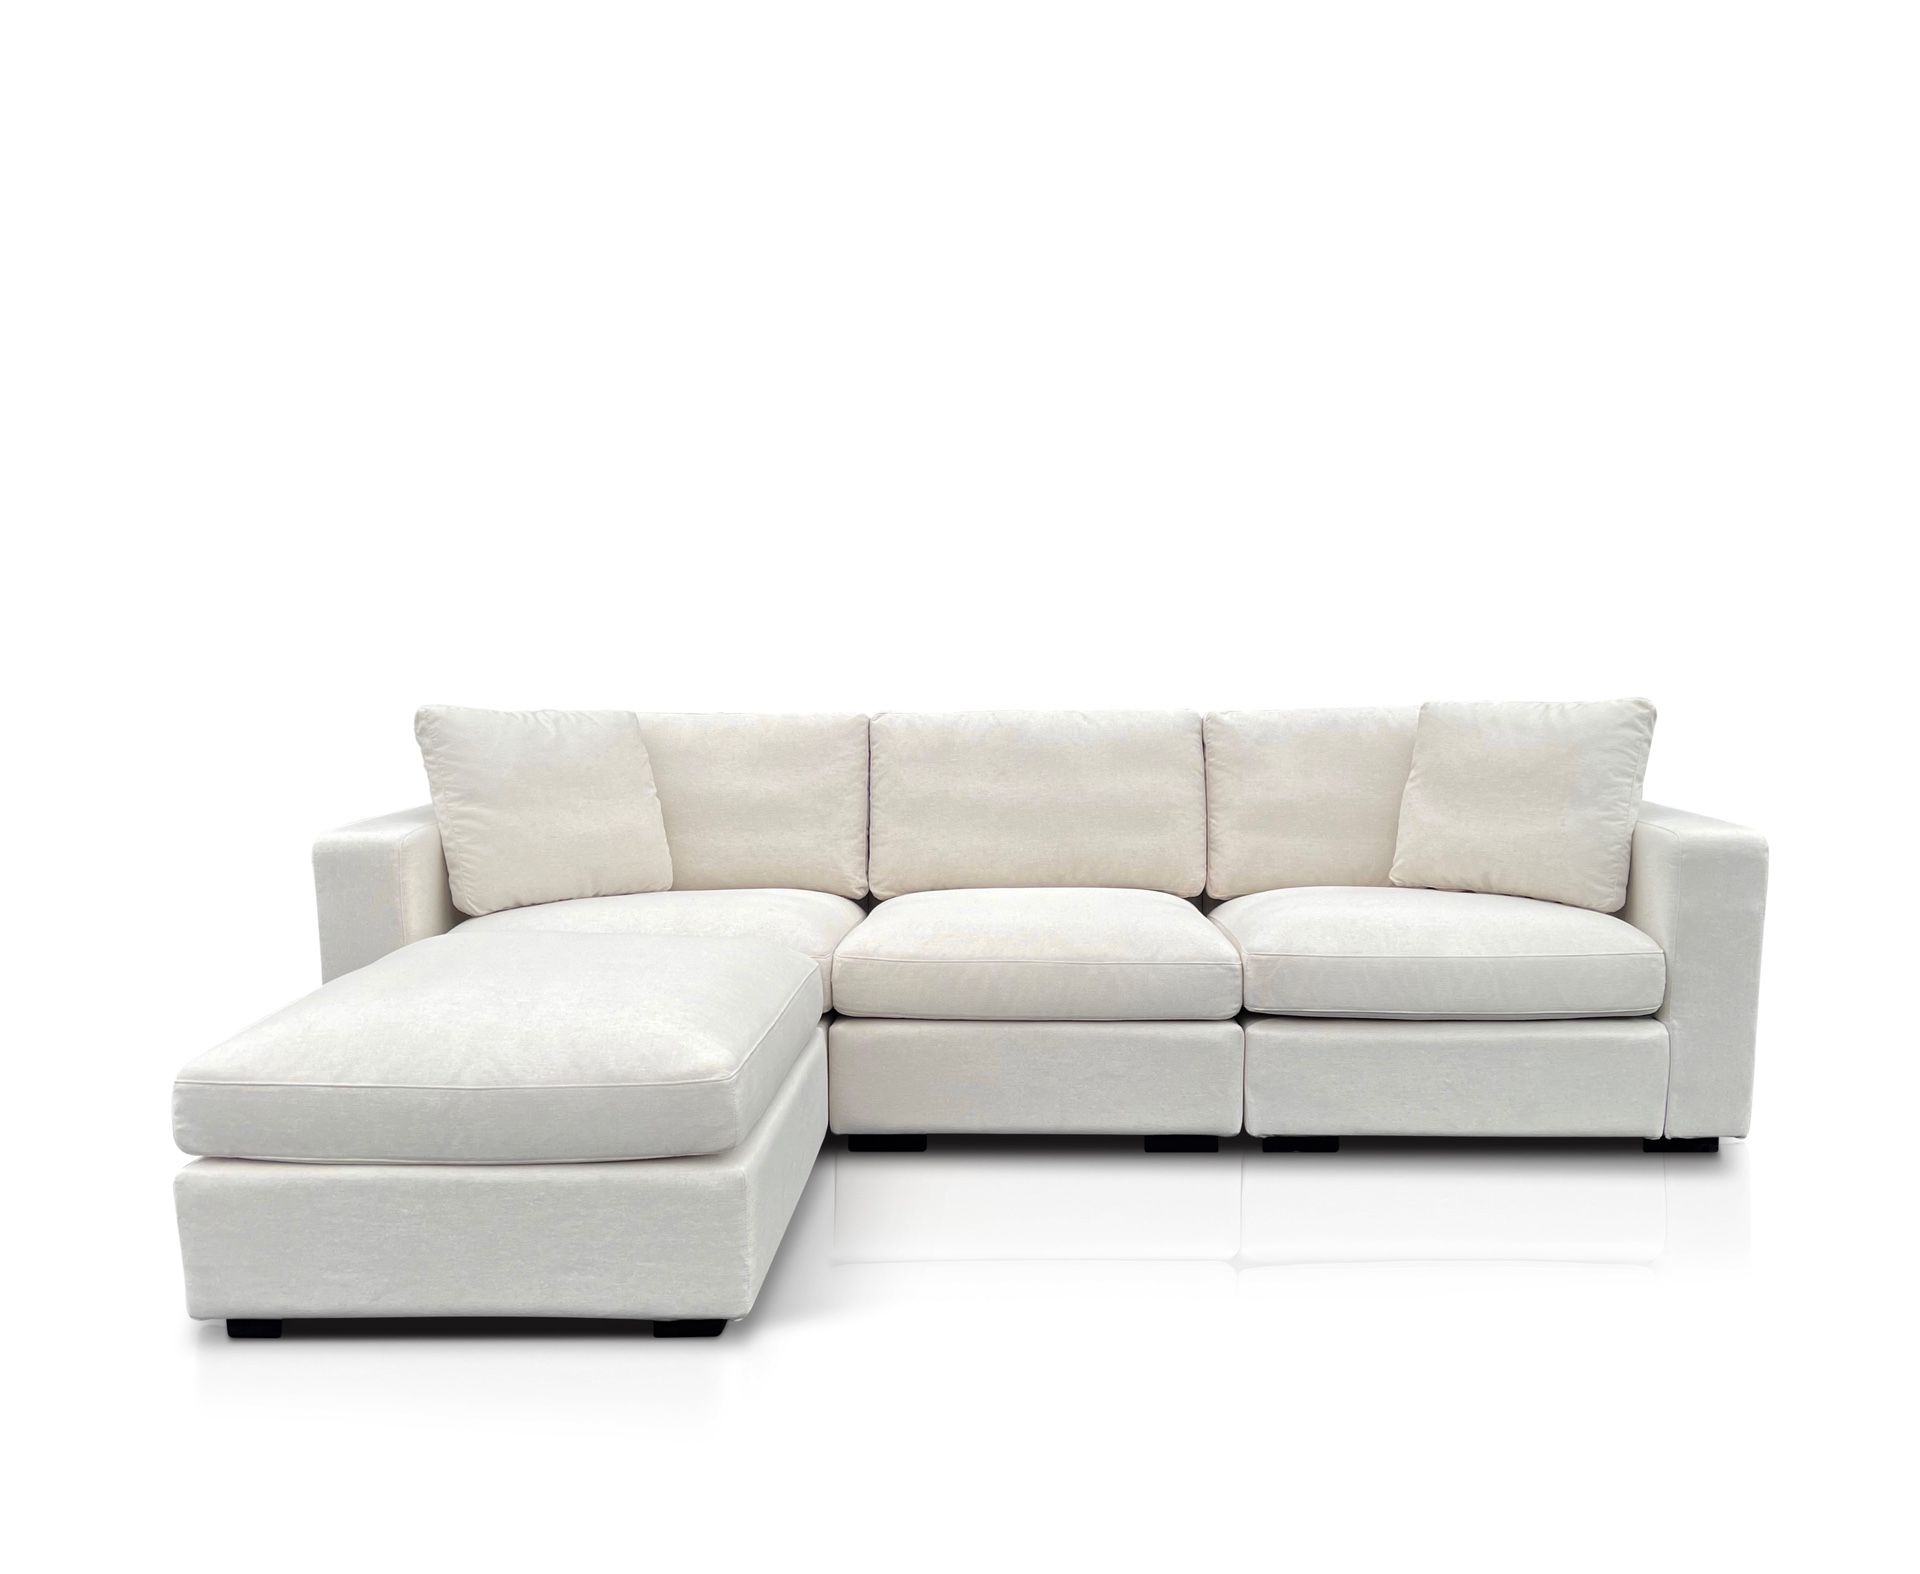 Beautiful Cloud Modular Sectional Sofa Couch - BRAND NEW WITH DELIVERY - 2 Colors!